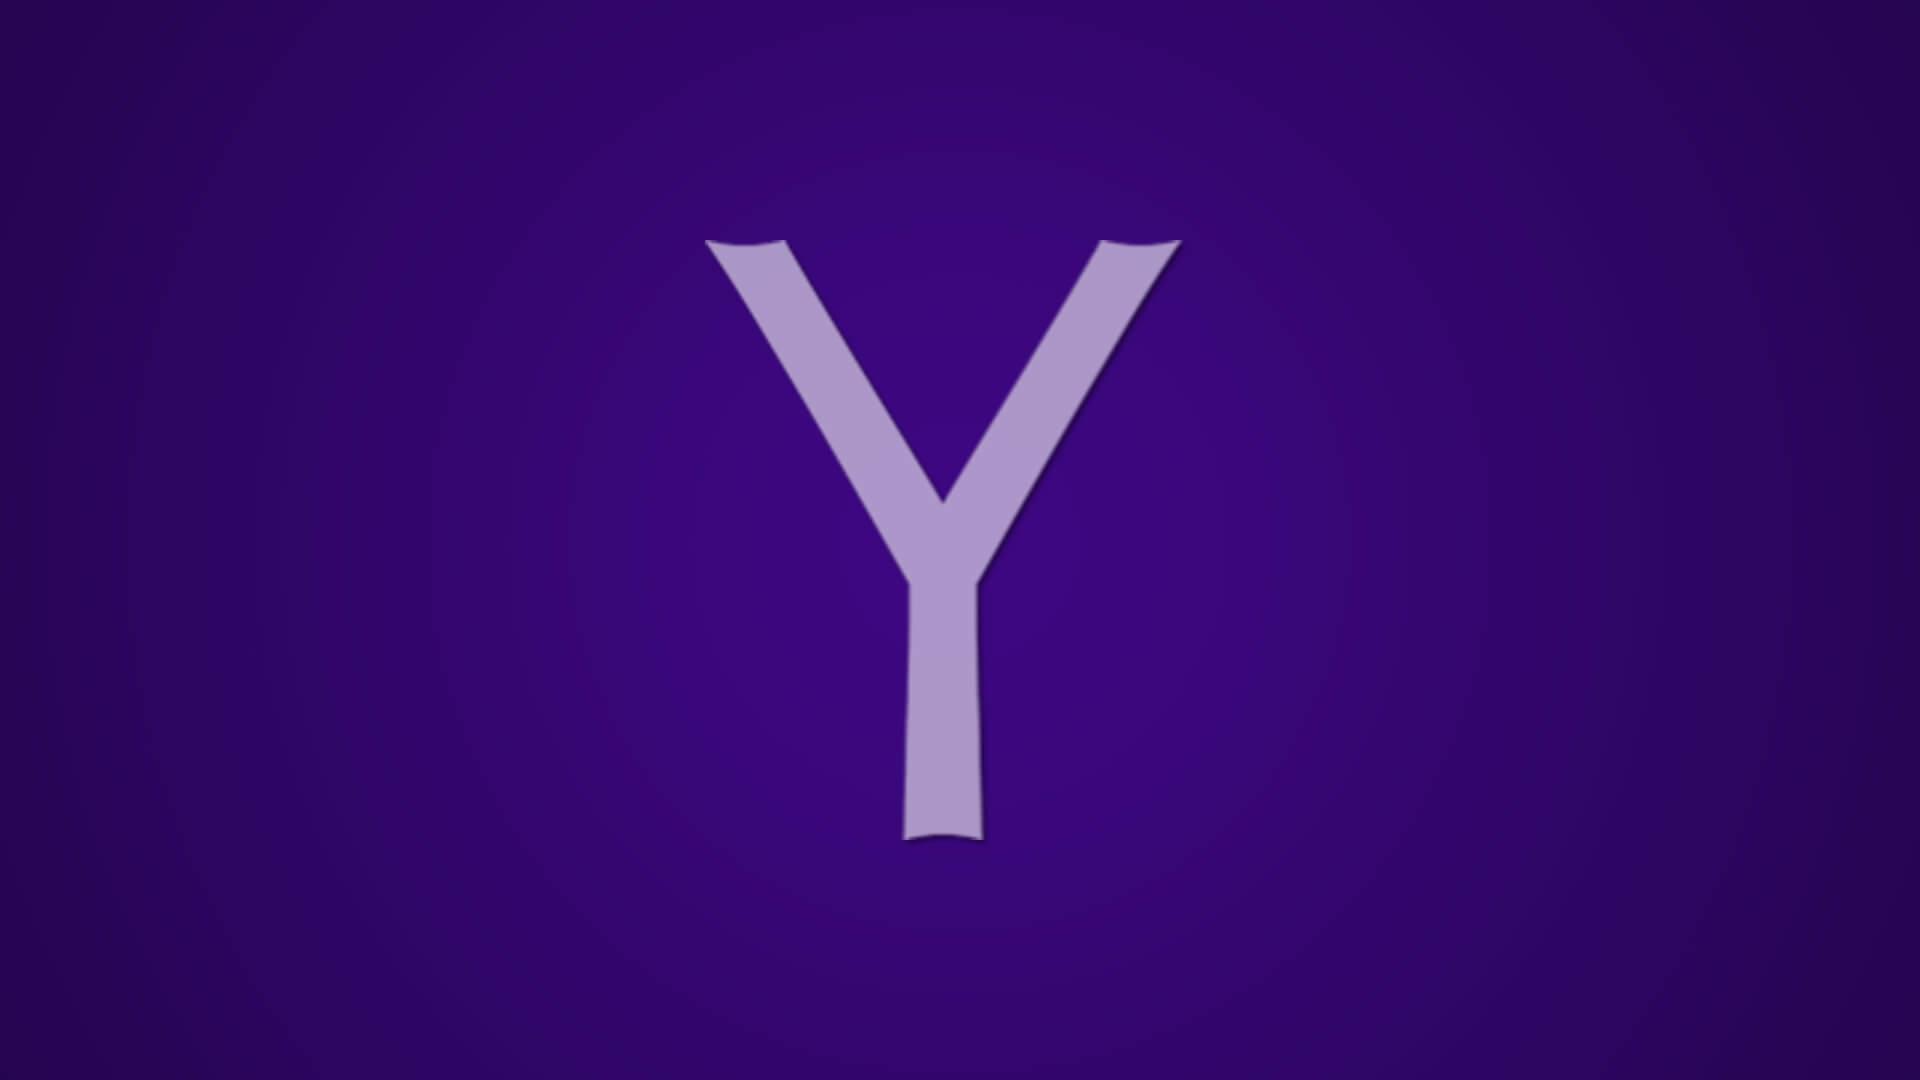 Blue and Purple Y Logo - The Yahoo Directory - Once The Internet's Most Important Search ...